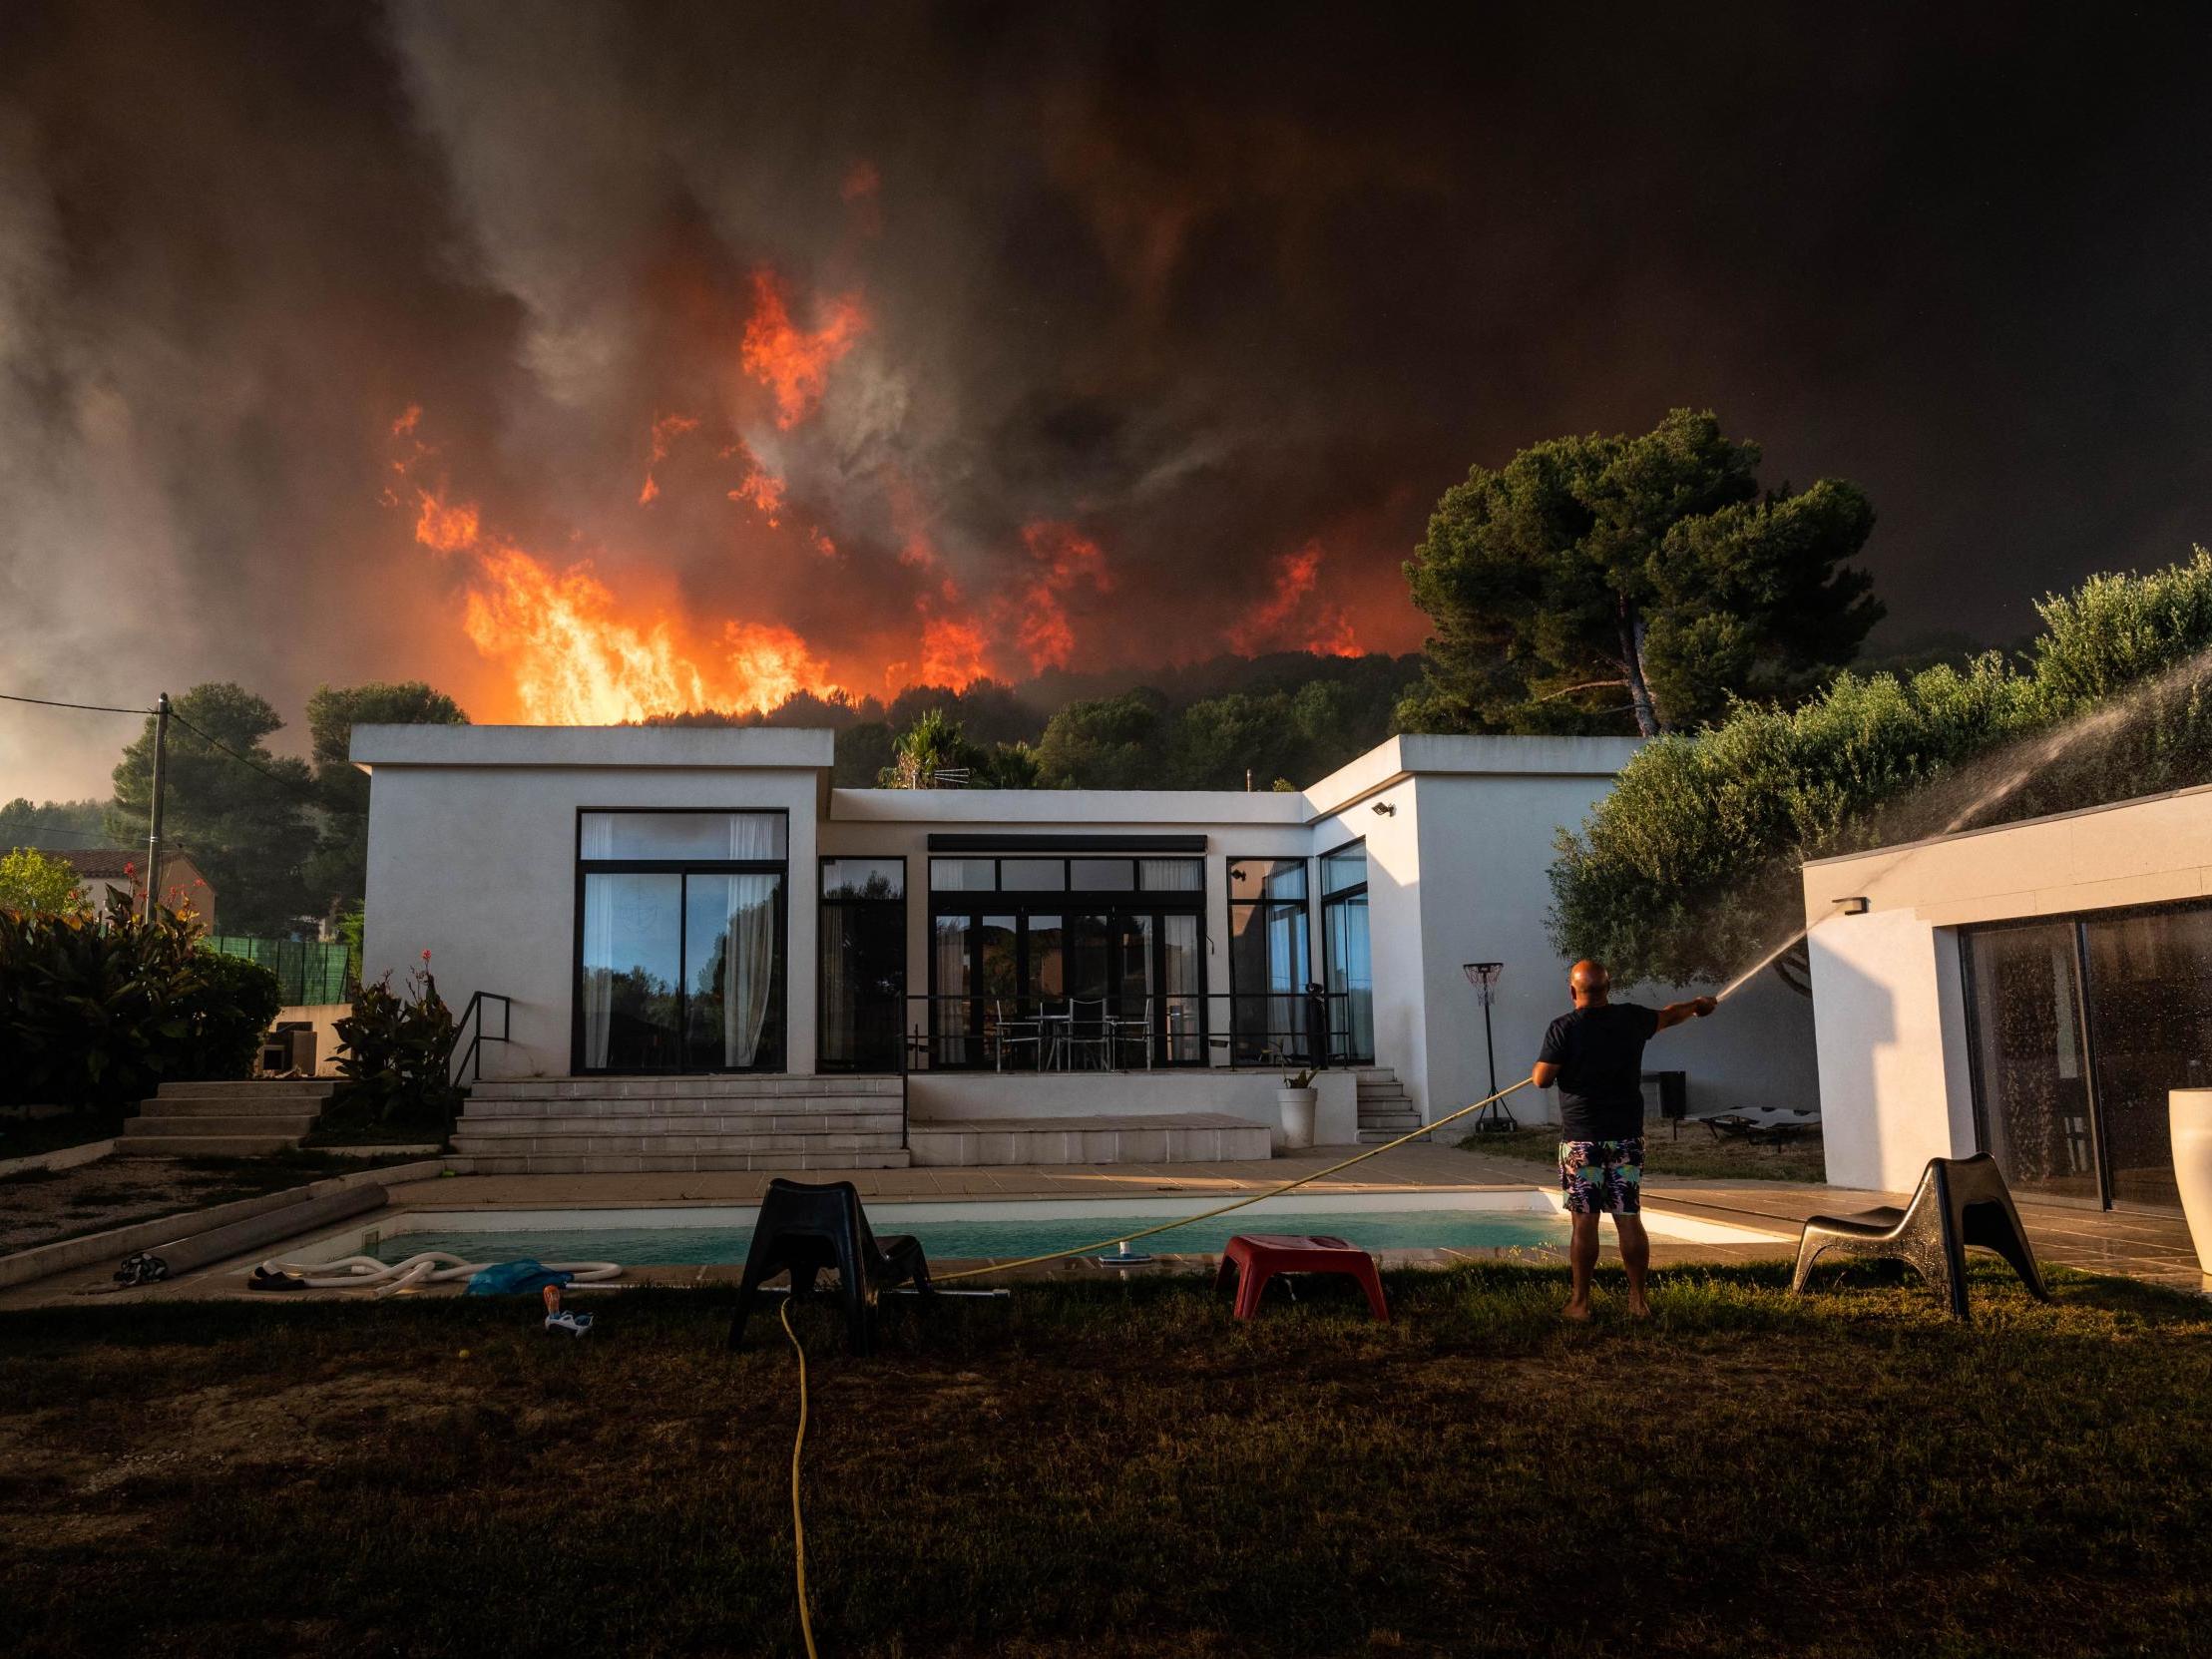 A man uses a garden hose to drench his house before being evacuated as a wild fire burns in the background, in La Couronne, near Marseille